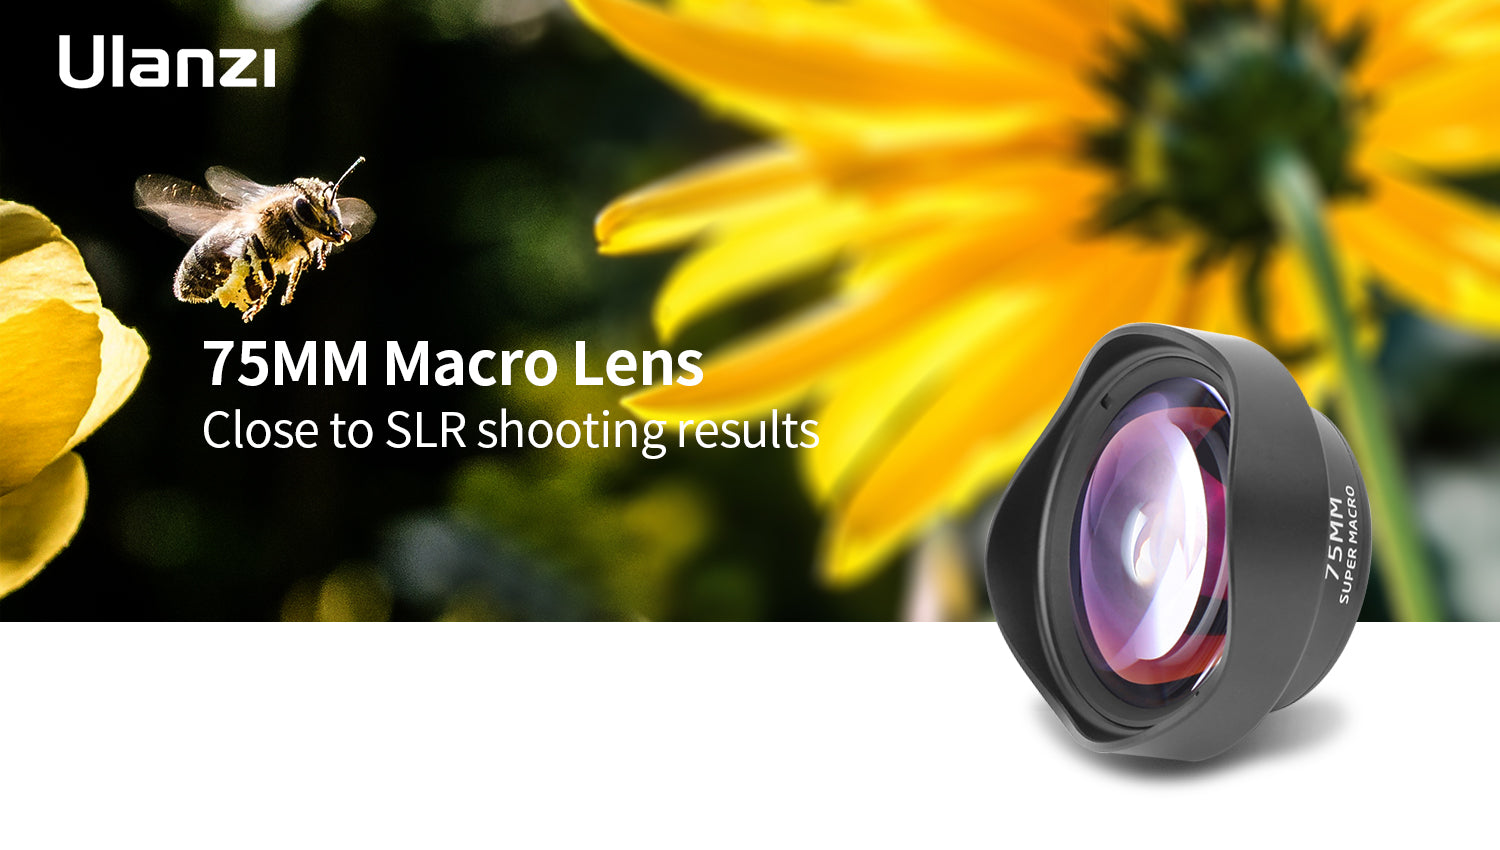 the Ulanzi 75mm Macro Phone Lens 1678 is like having a pro camera right in your pocket.